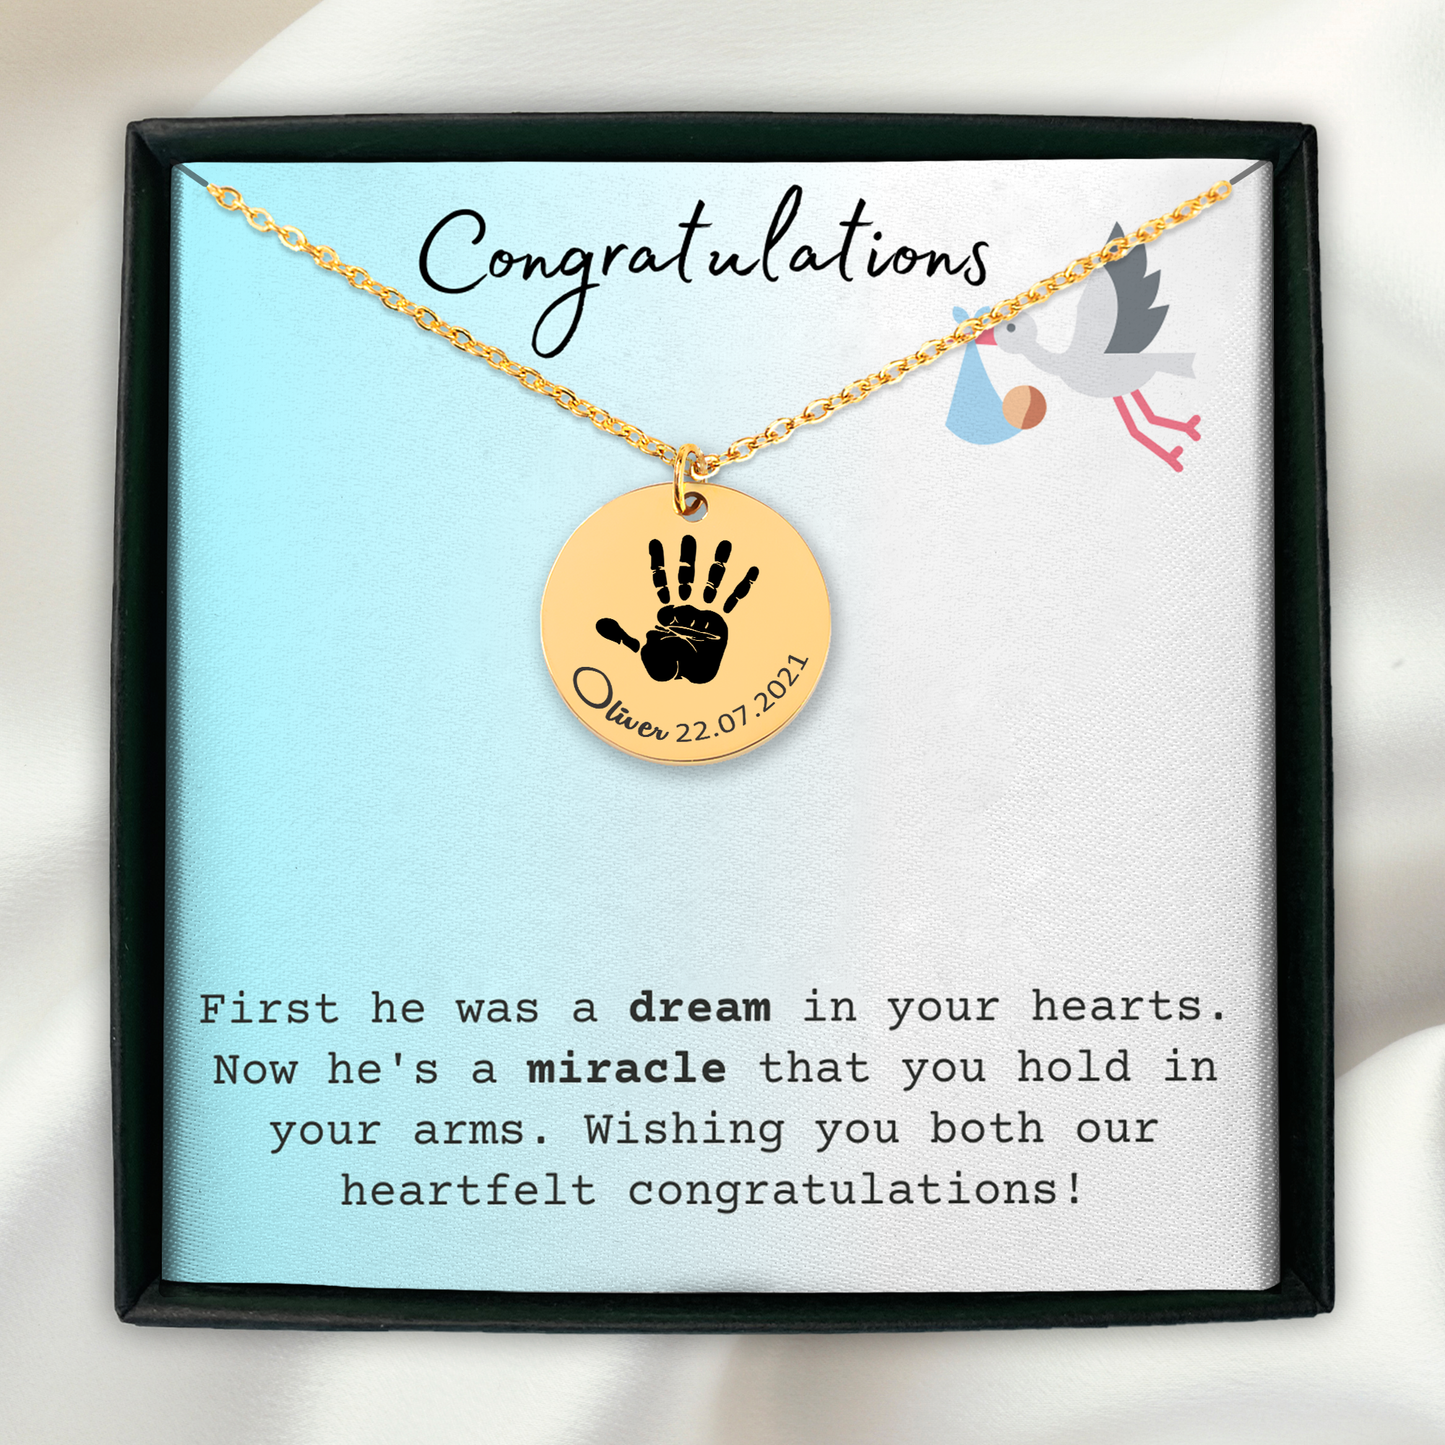 Personalized Necklace, Gifts for Mom, Gifts for Dad, Baby Shower, Anniversary, Mother, Father, Sibling, Actual Hand Print Necklace